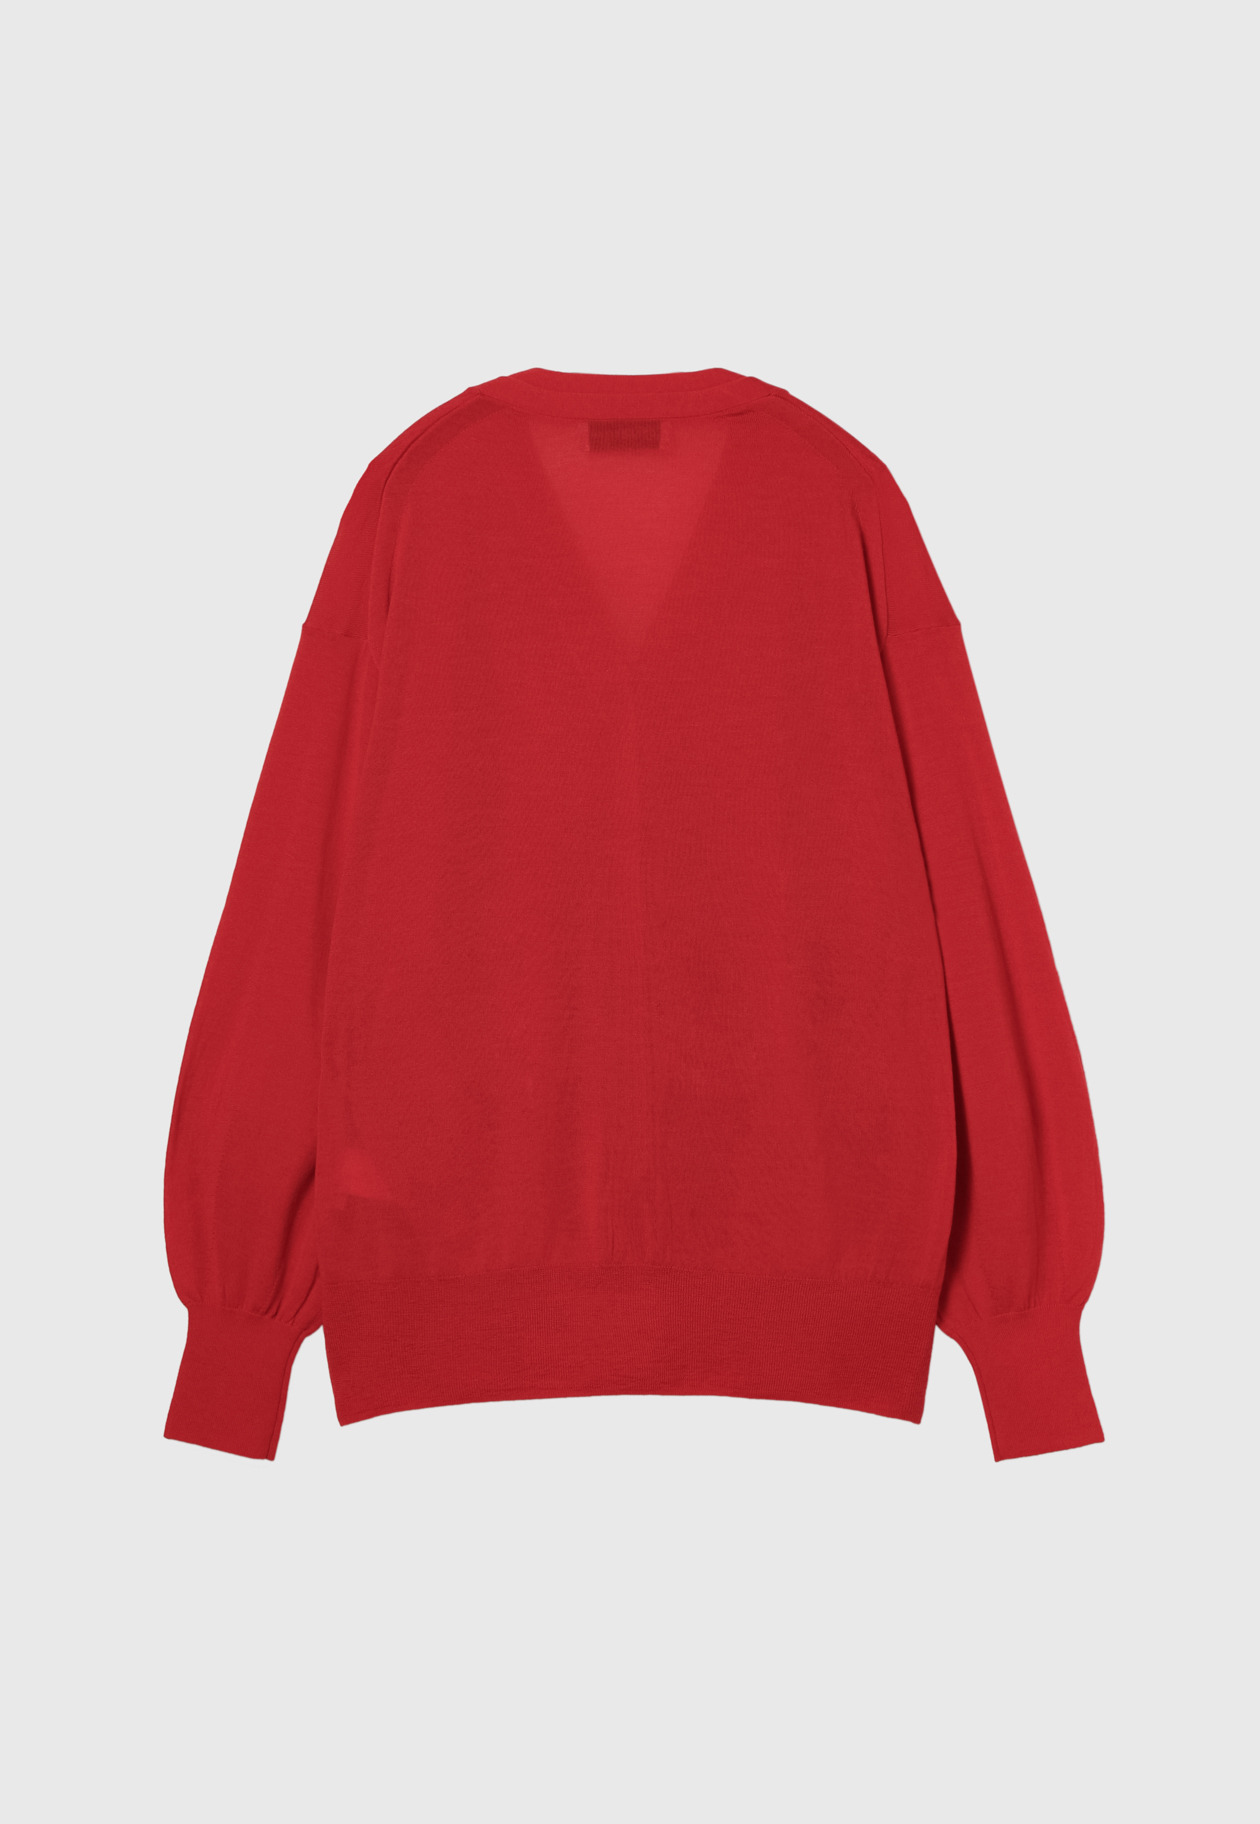 FRONT LAYER CARDIGAN 詳細画像 Red 7